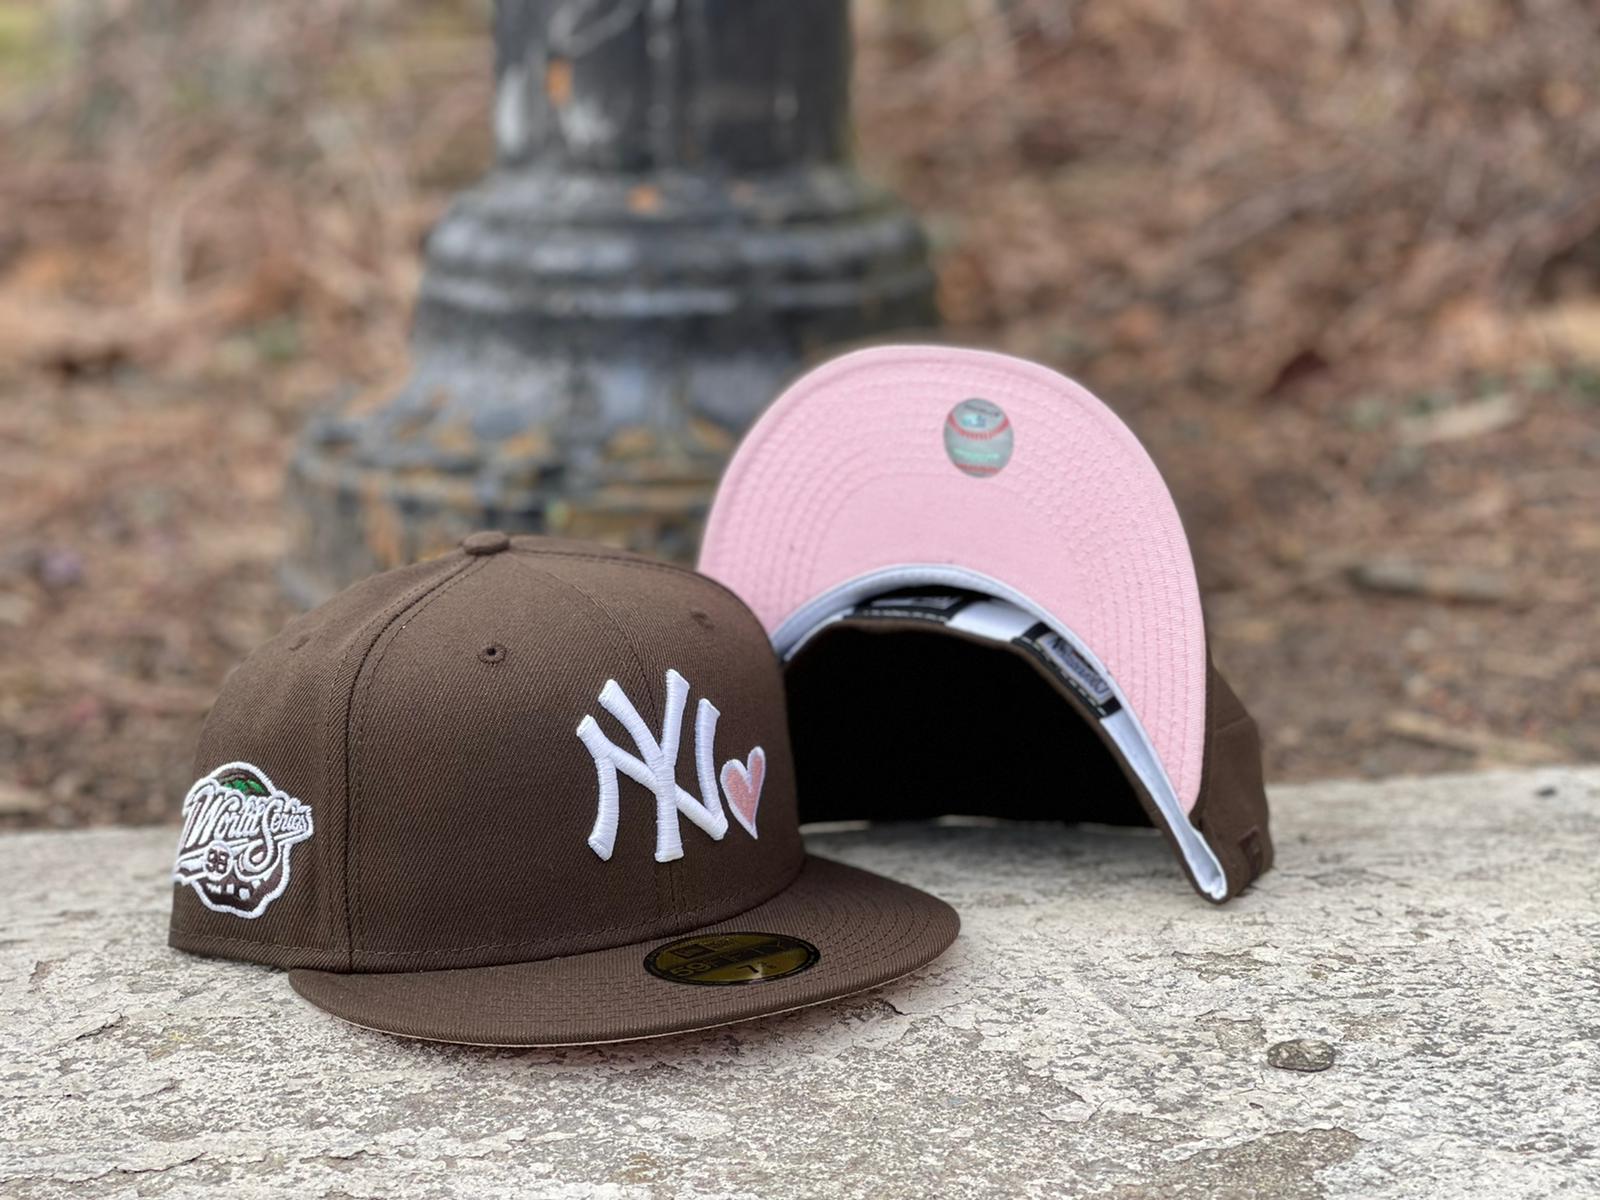 NY World Series Snapback (Brown/Pink) - ALMOST SOMEDAY